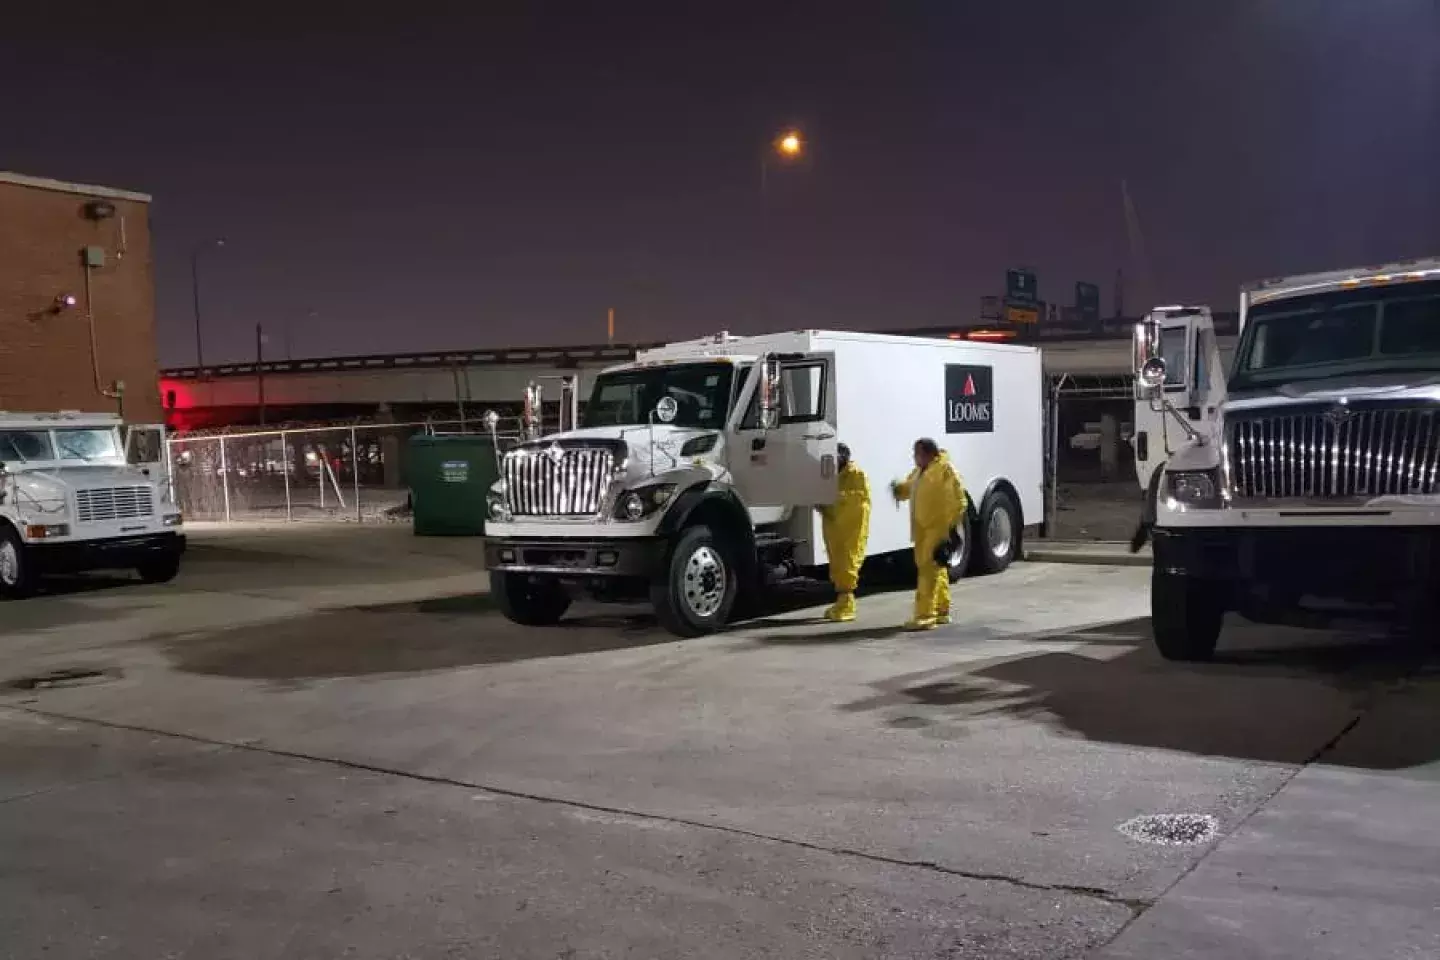 Loomis employees in an armored truck bay